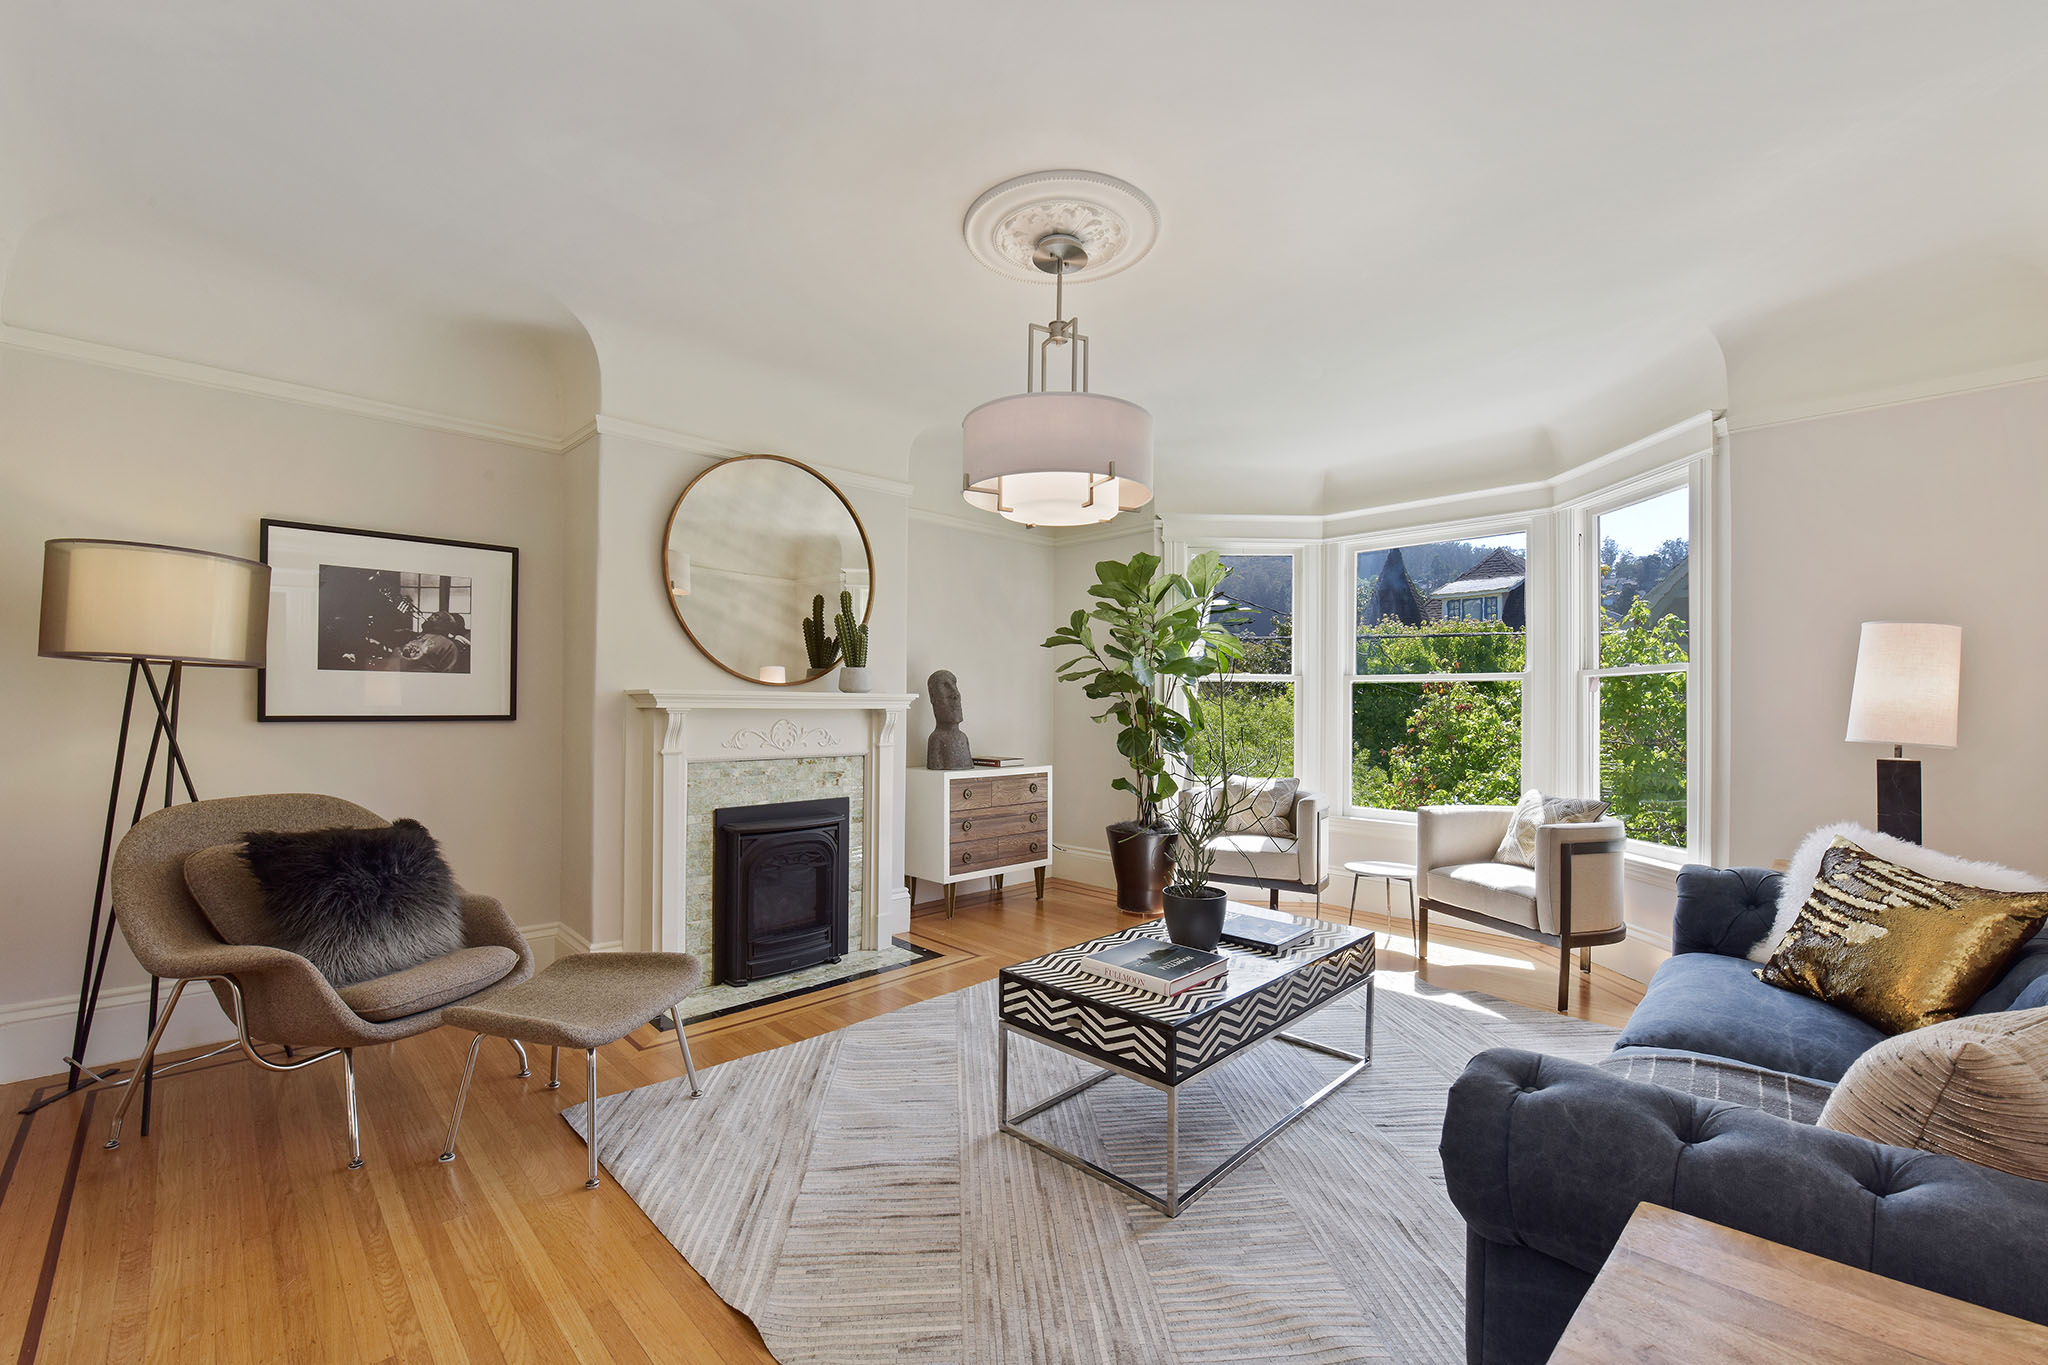 Property Photo: Living room, showing a fireplace with white mantle and bay windows